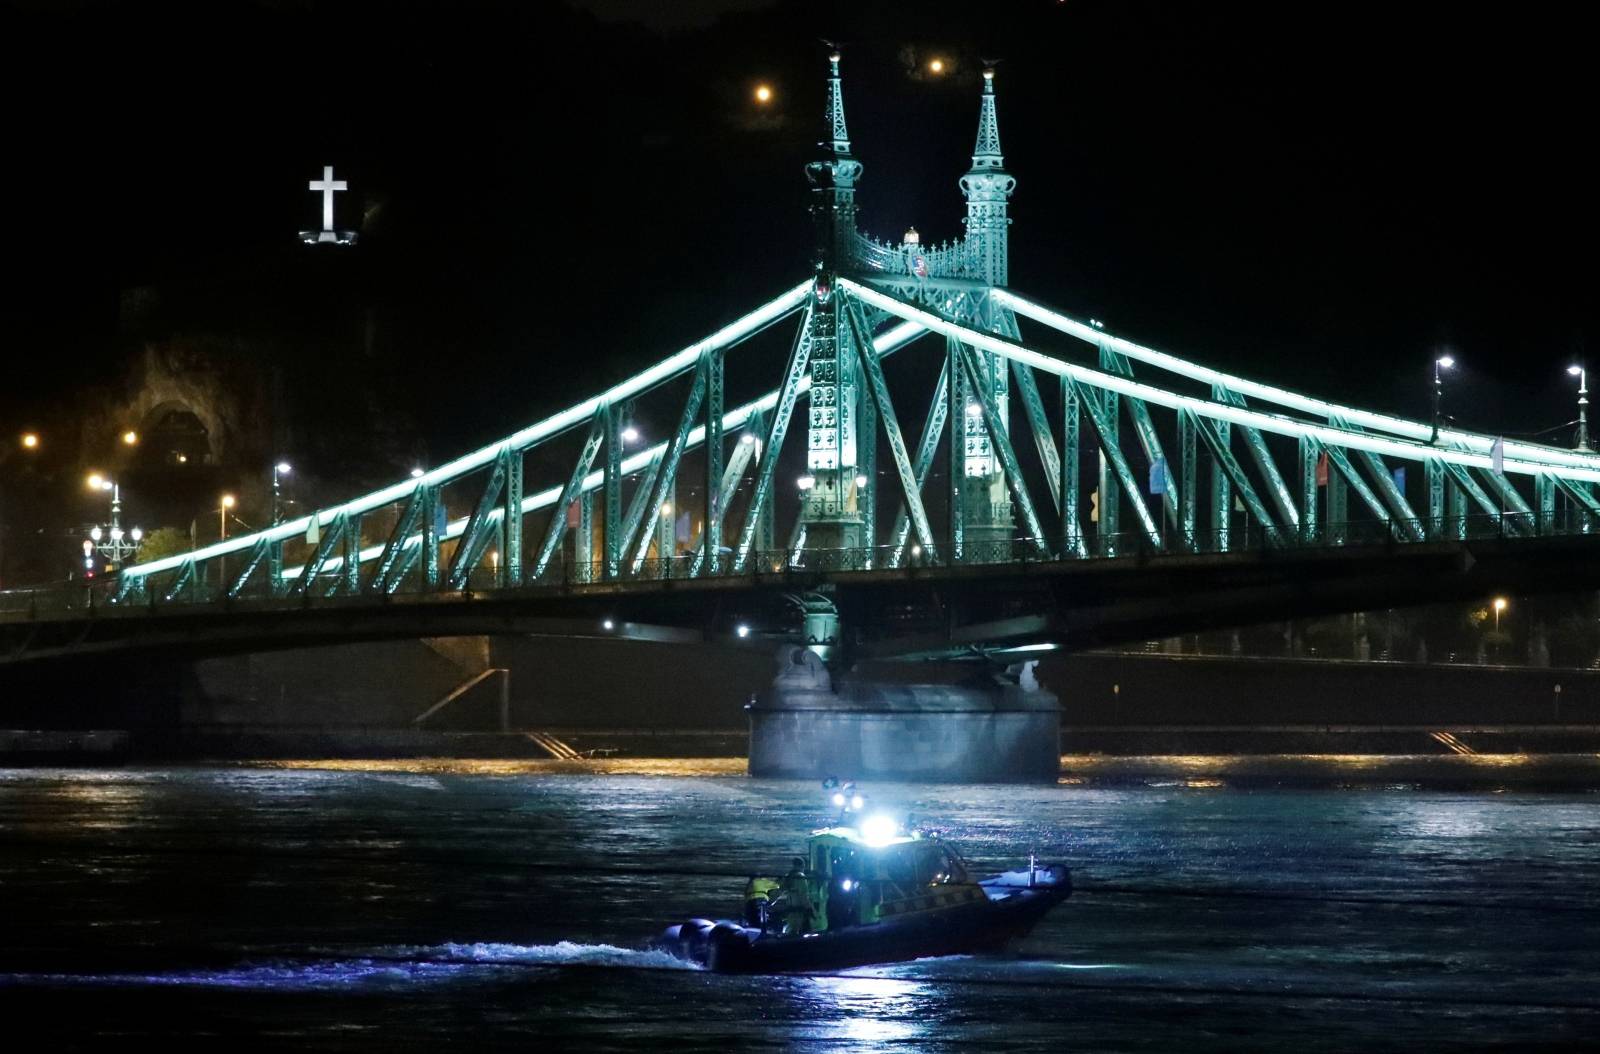 A rescue boat is seen on the Danube river after a tourist boat capsizedÂ in Budapest